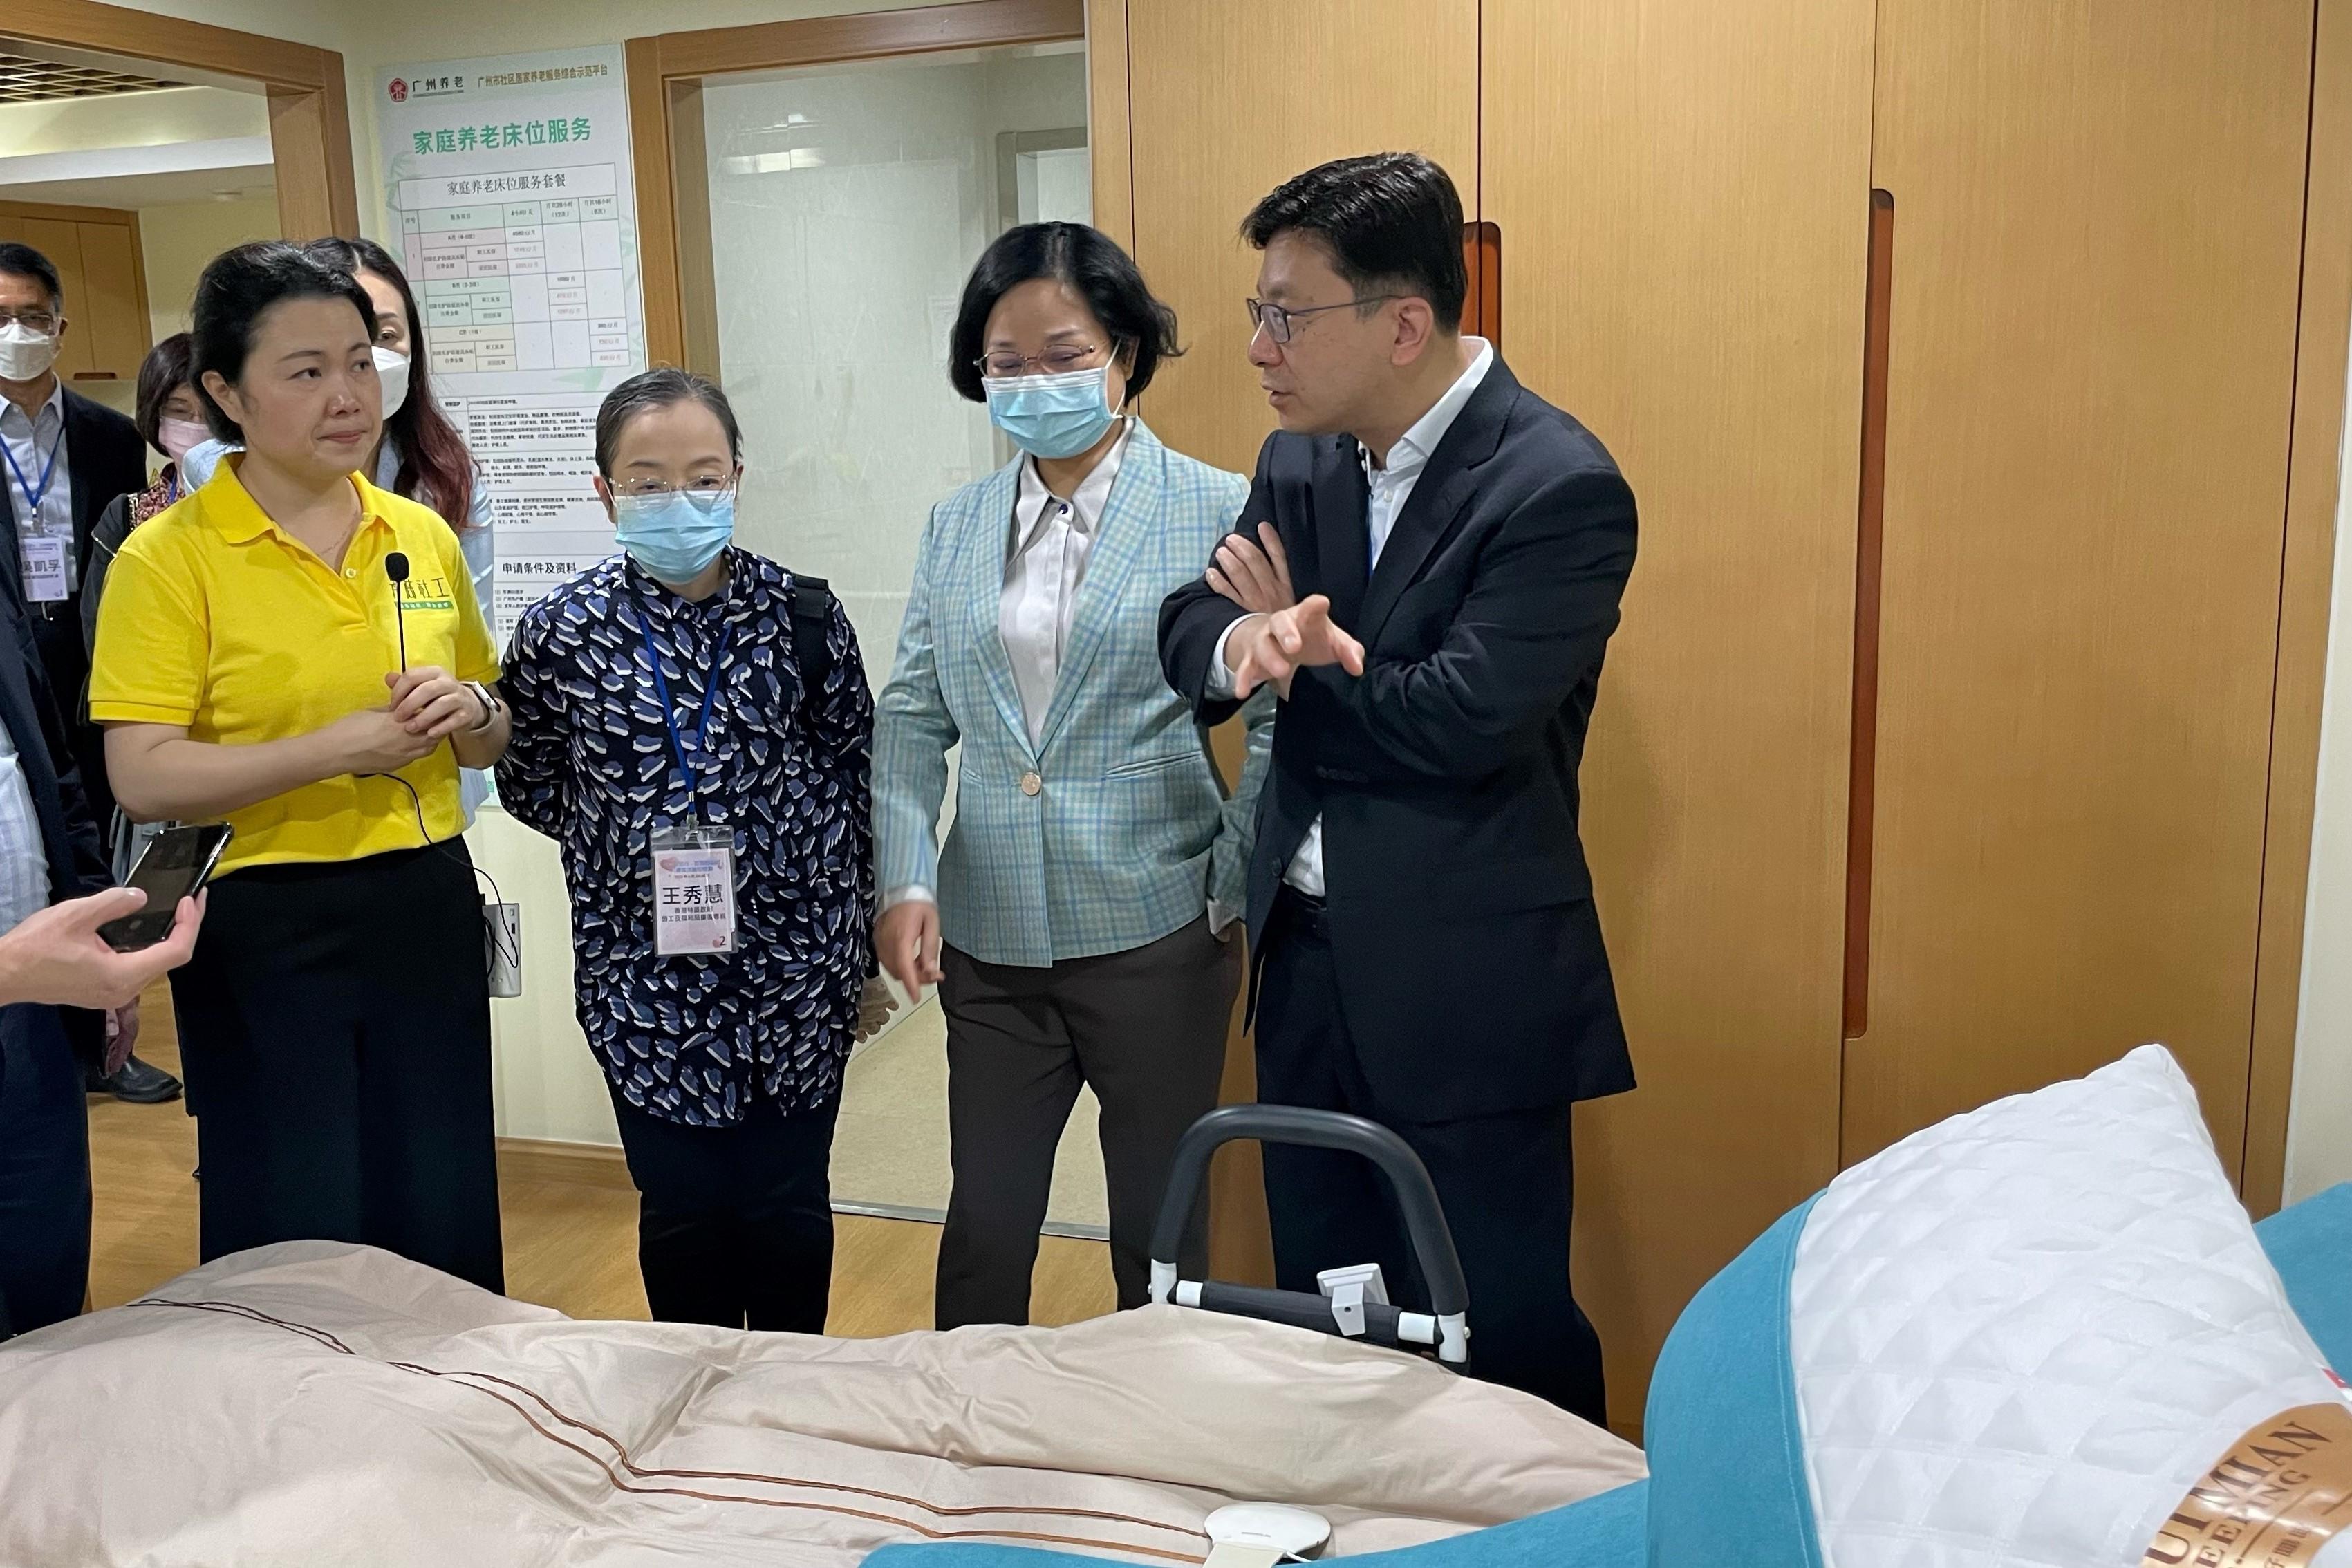 The Secretary for Labour and Welfare, Mr Chris Sun, led the Hong Kong social welfare sector delegation on a visit to Guangdong and visited a model ageing-in-place integrated service centre in Guangzhou yesterday morning (April 25). Photo shows Mr Sun (first right), accompanied by the Commissioner for Rehabilitation of the Labour and Welfare Bureau, Miss Vega Wong (third right), learning more about how electric assistive support on the bed enables elderly persons to better age in place.